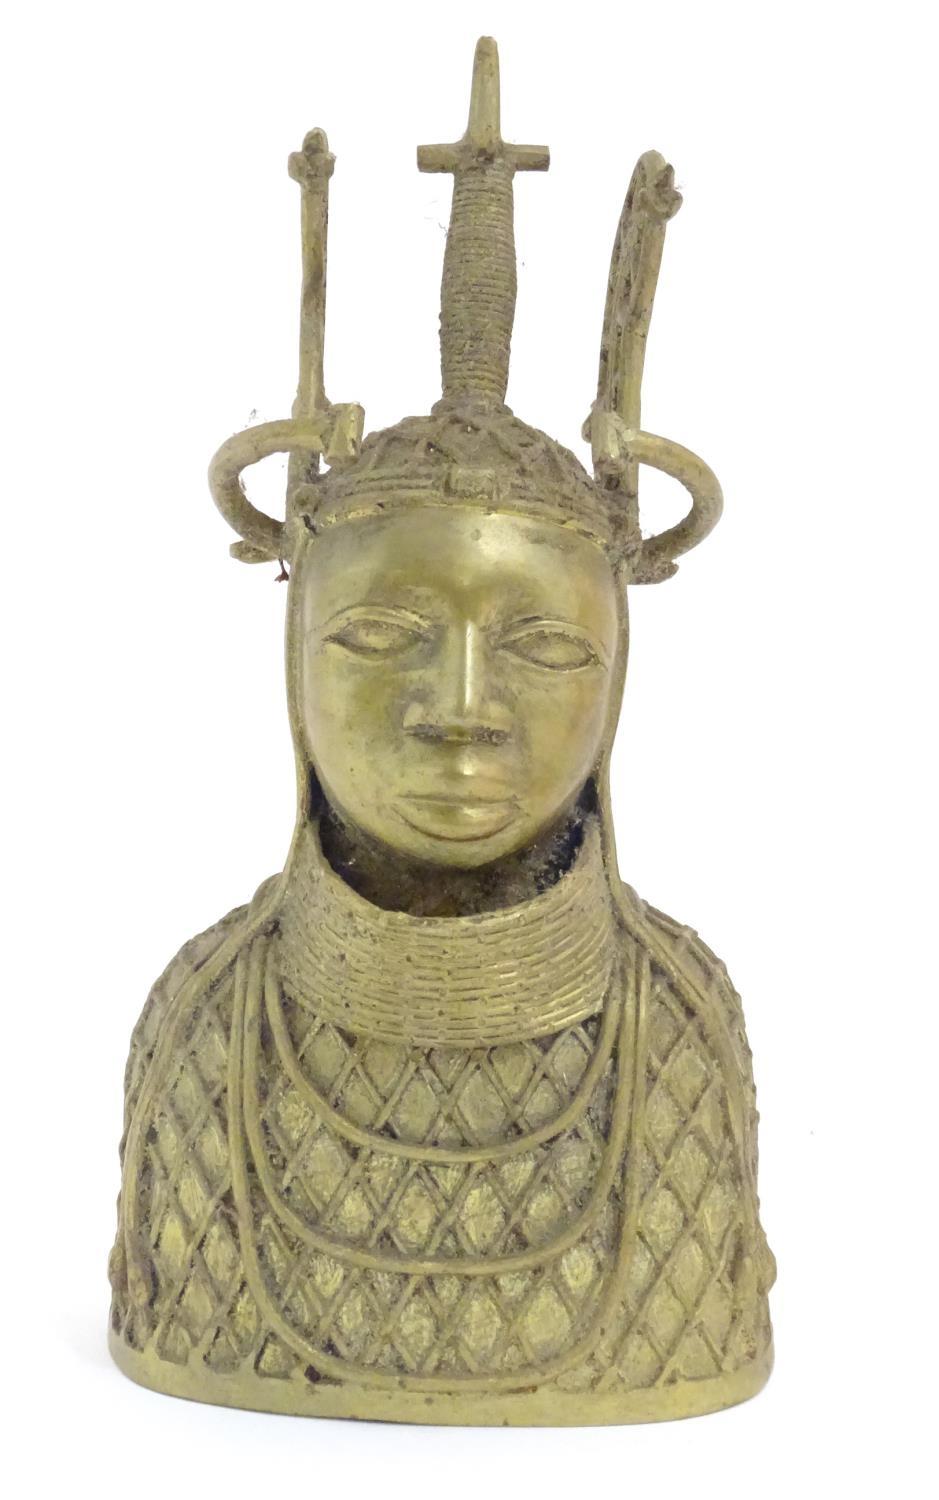 An early 20thC cast model of the Benin Bronze bust depicting Oba of Benin in ceremonial dress. - Image 3 of 5